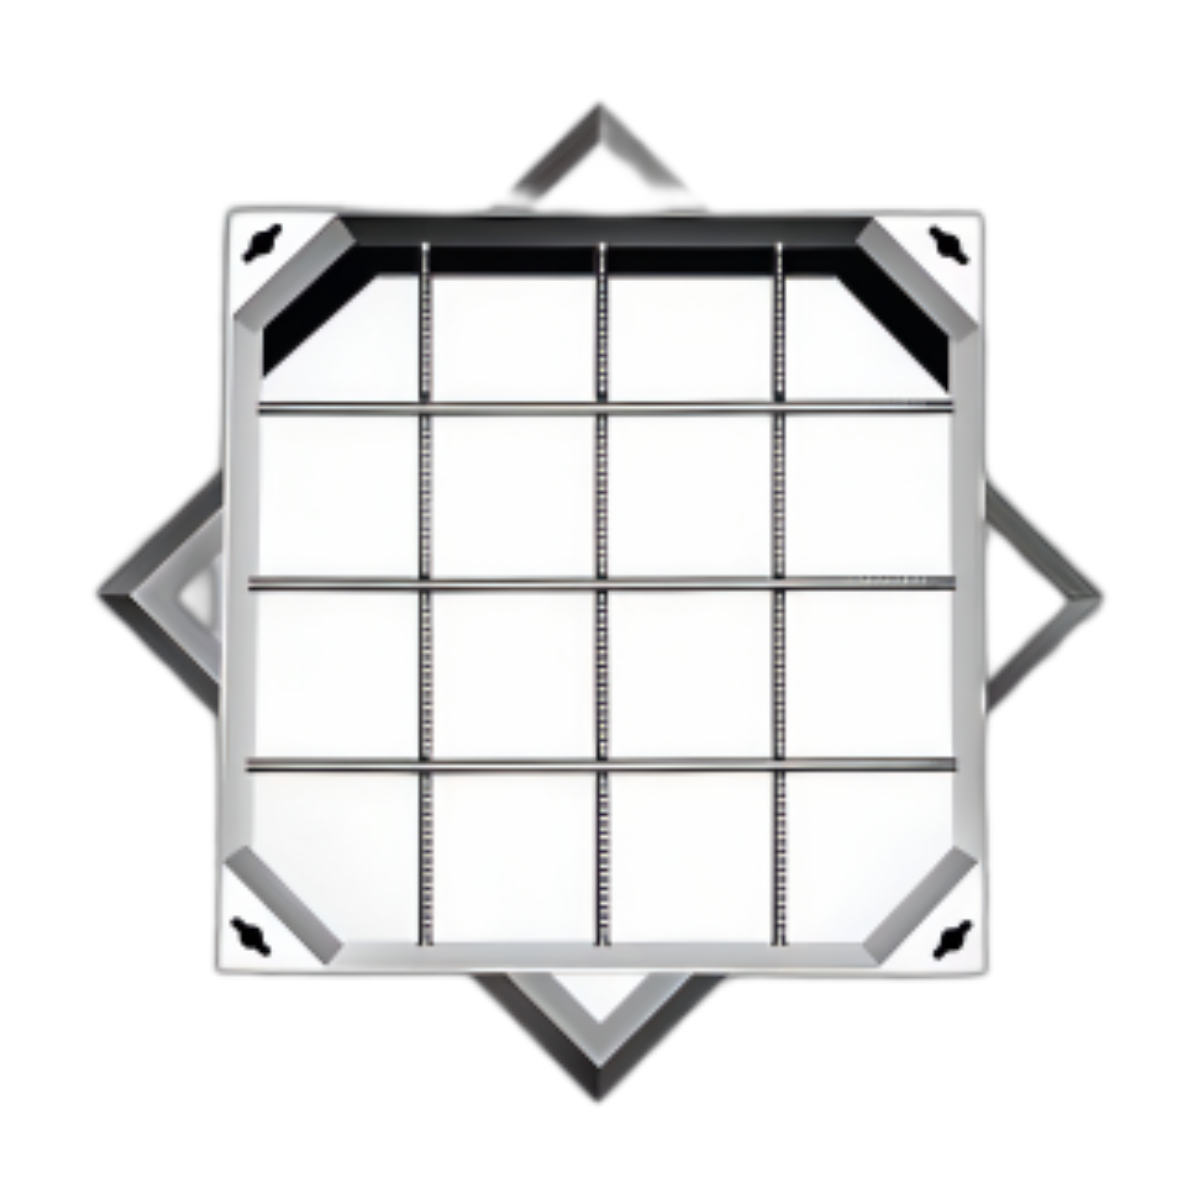 Stainless steel square manhole cover Decorate the round rain cover Manhole cover Custom machining Rain grating Collecting well